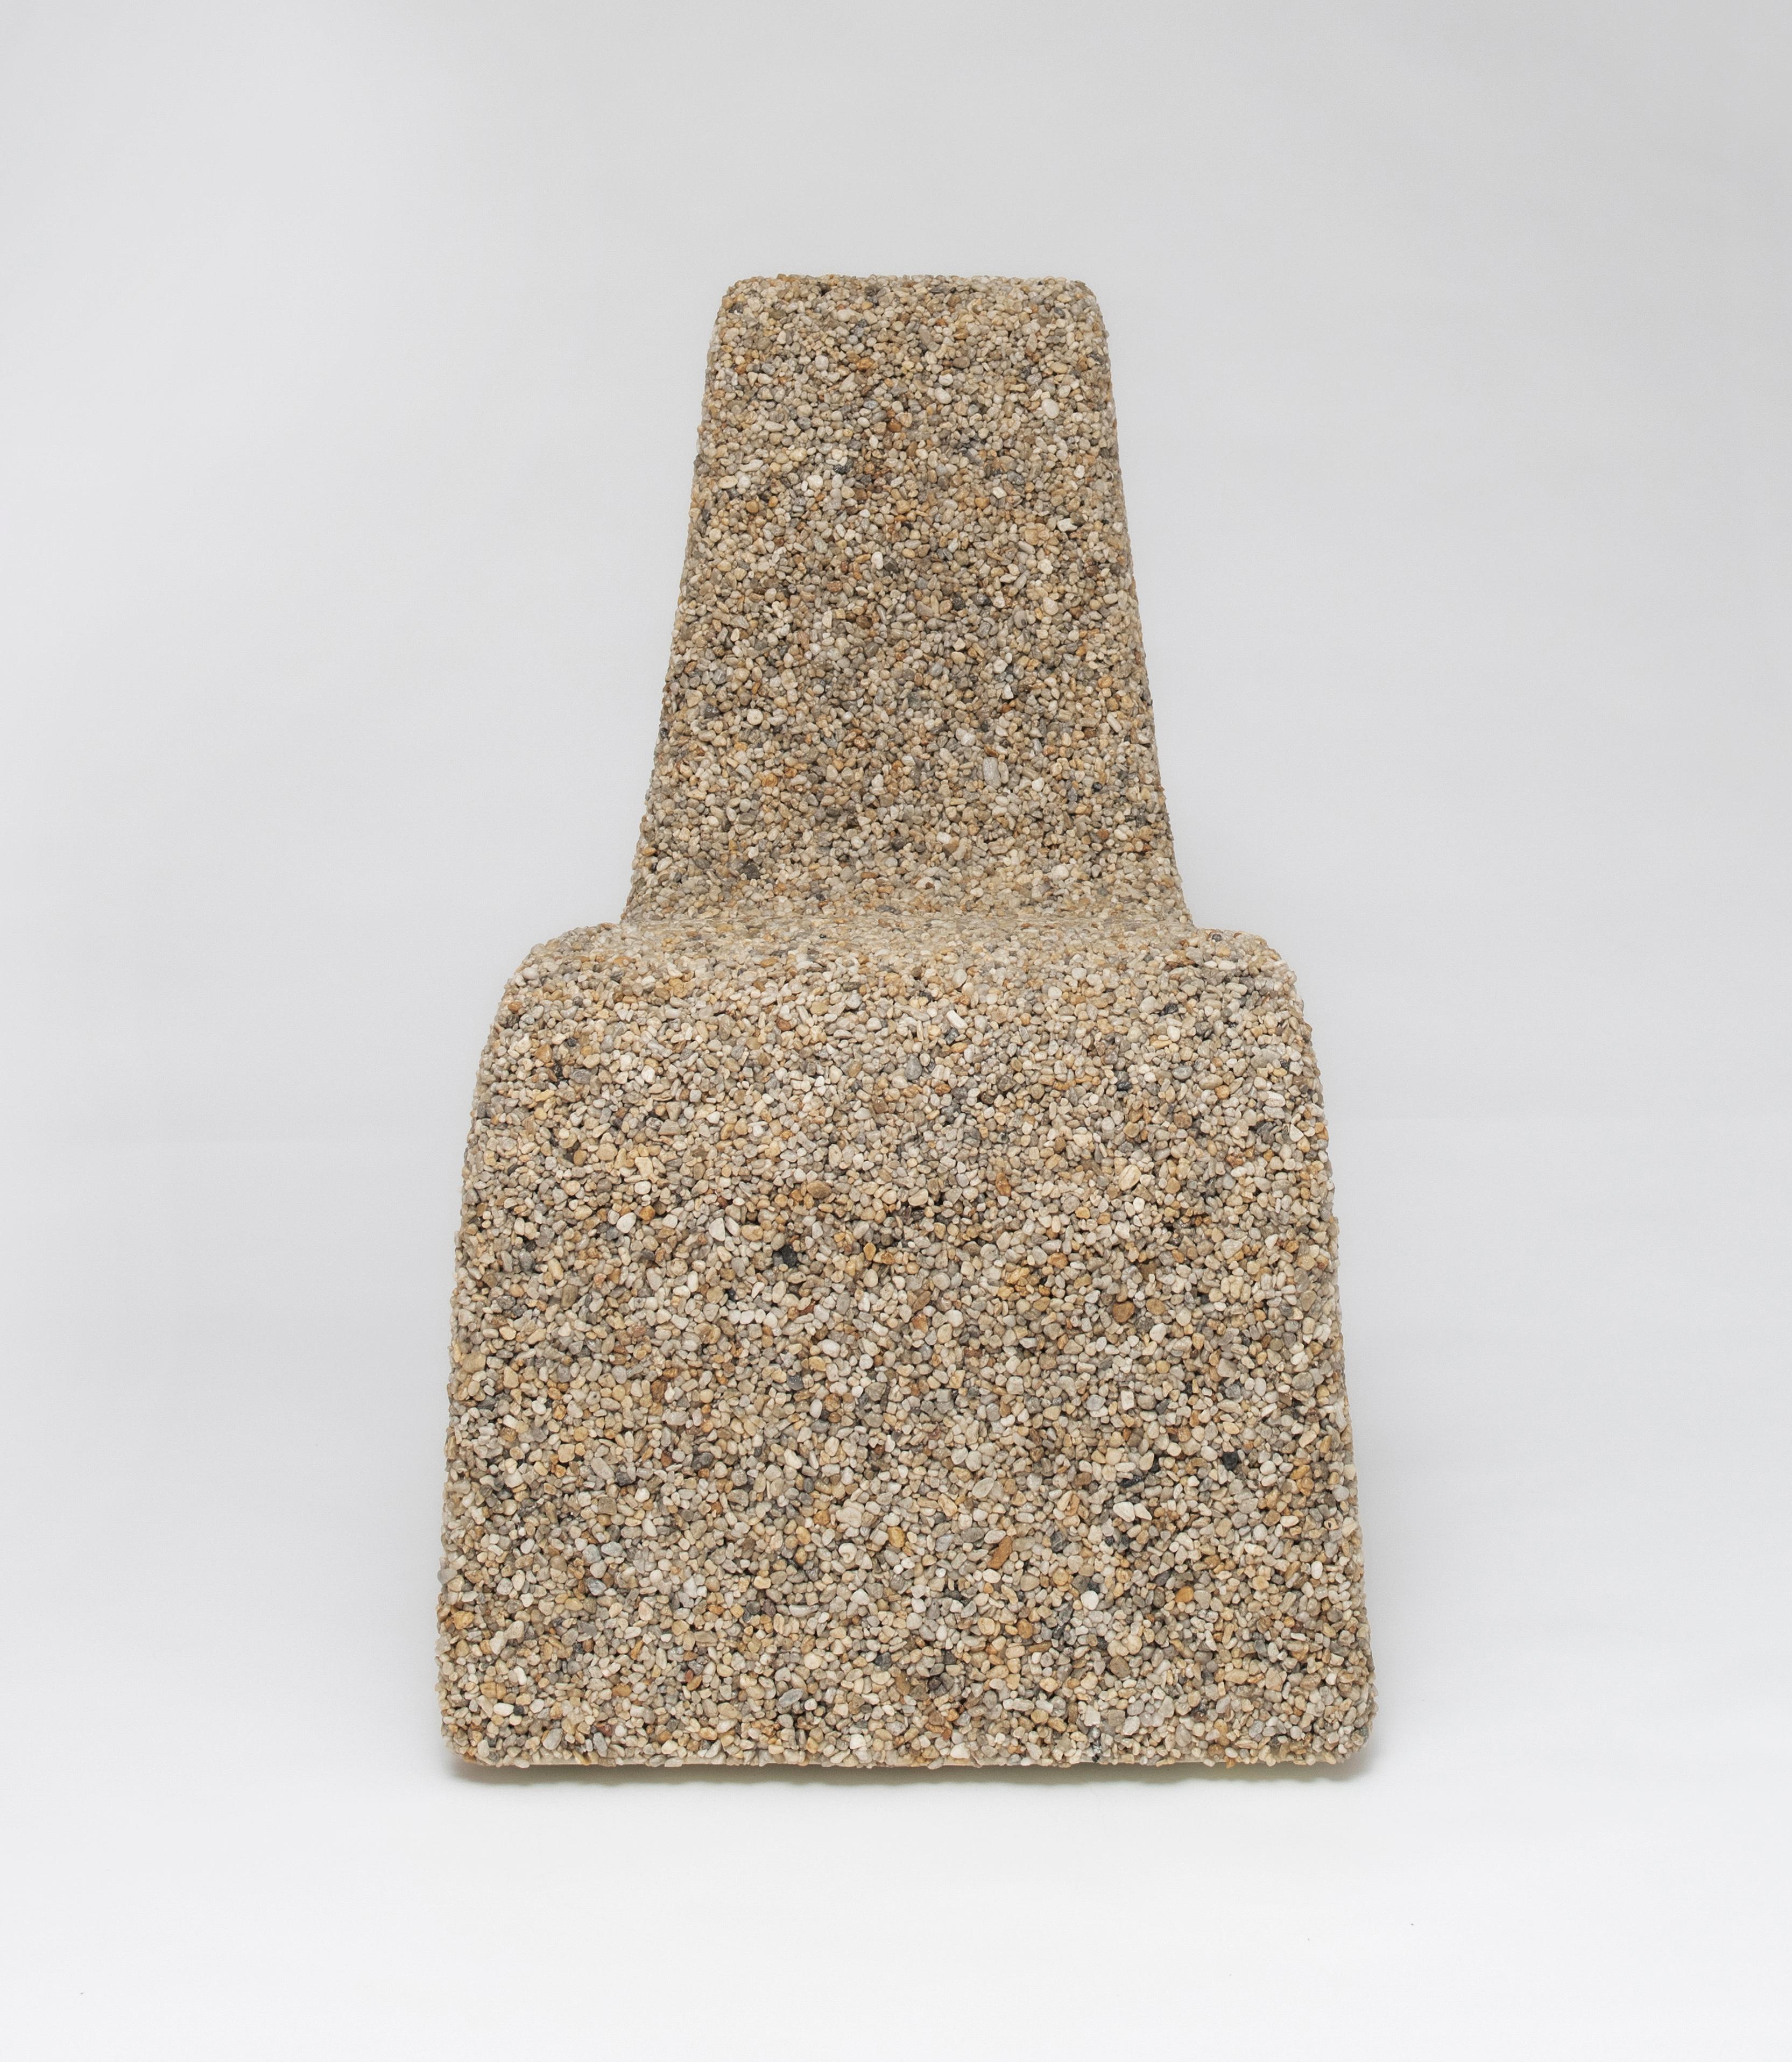 The Gravel Chair is another experimental chair designed and produced by Philipp Aduatz by using solely construction materials. The idea was to use materials designed for an application in large scale for an experimental furniture design